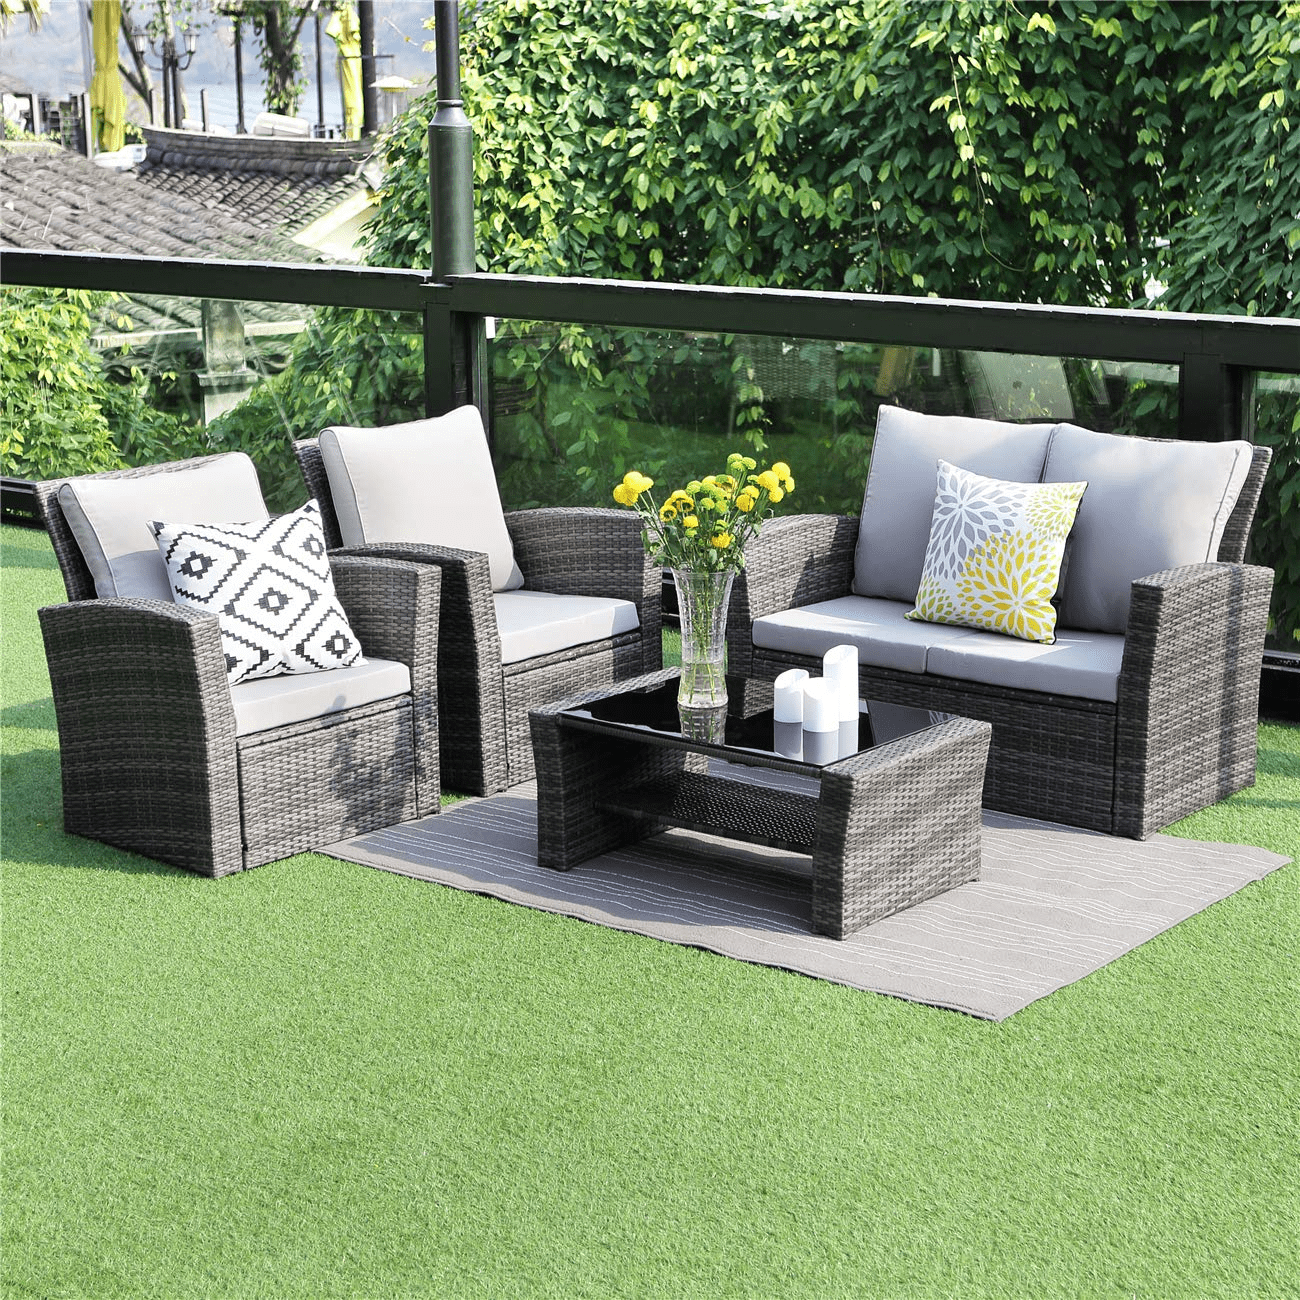 4PCS Patio Furniture Rattan Wicker Sectional Sofa Chair Couch Set Deluxe Outdoor 